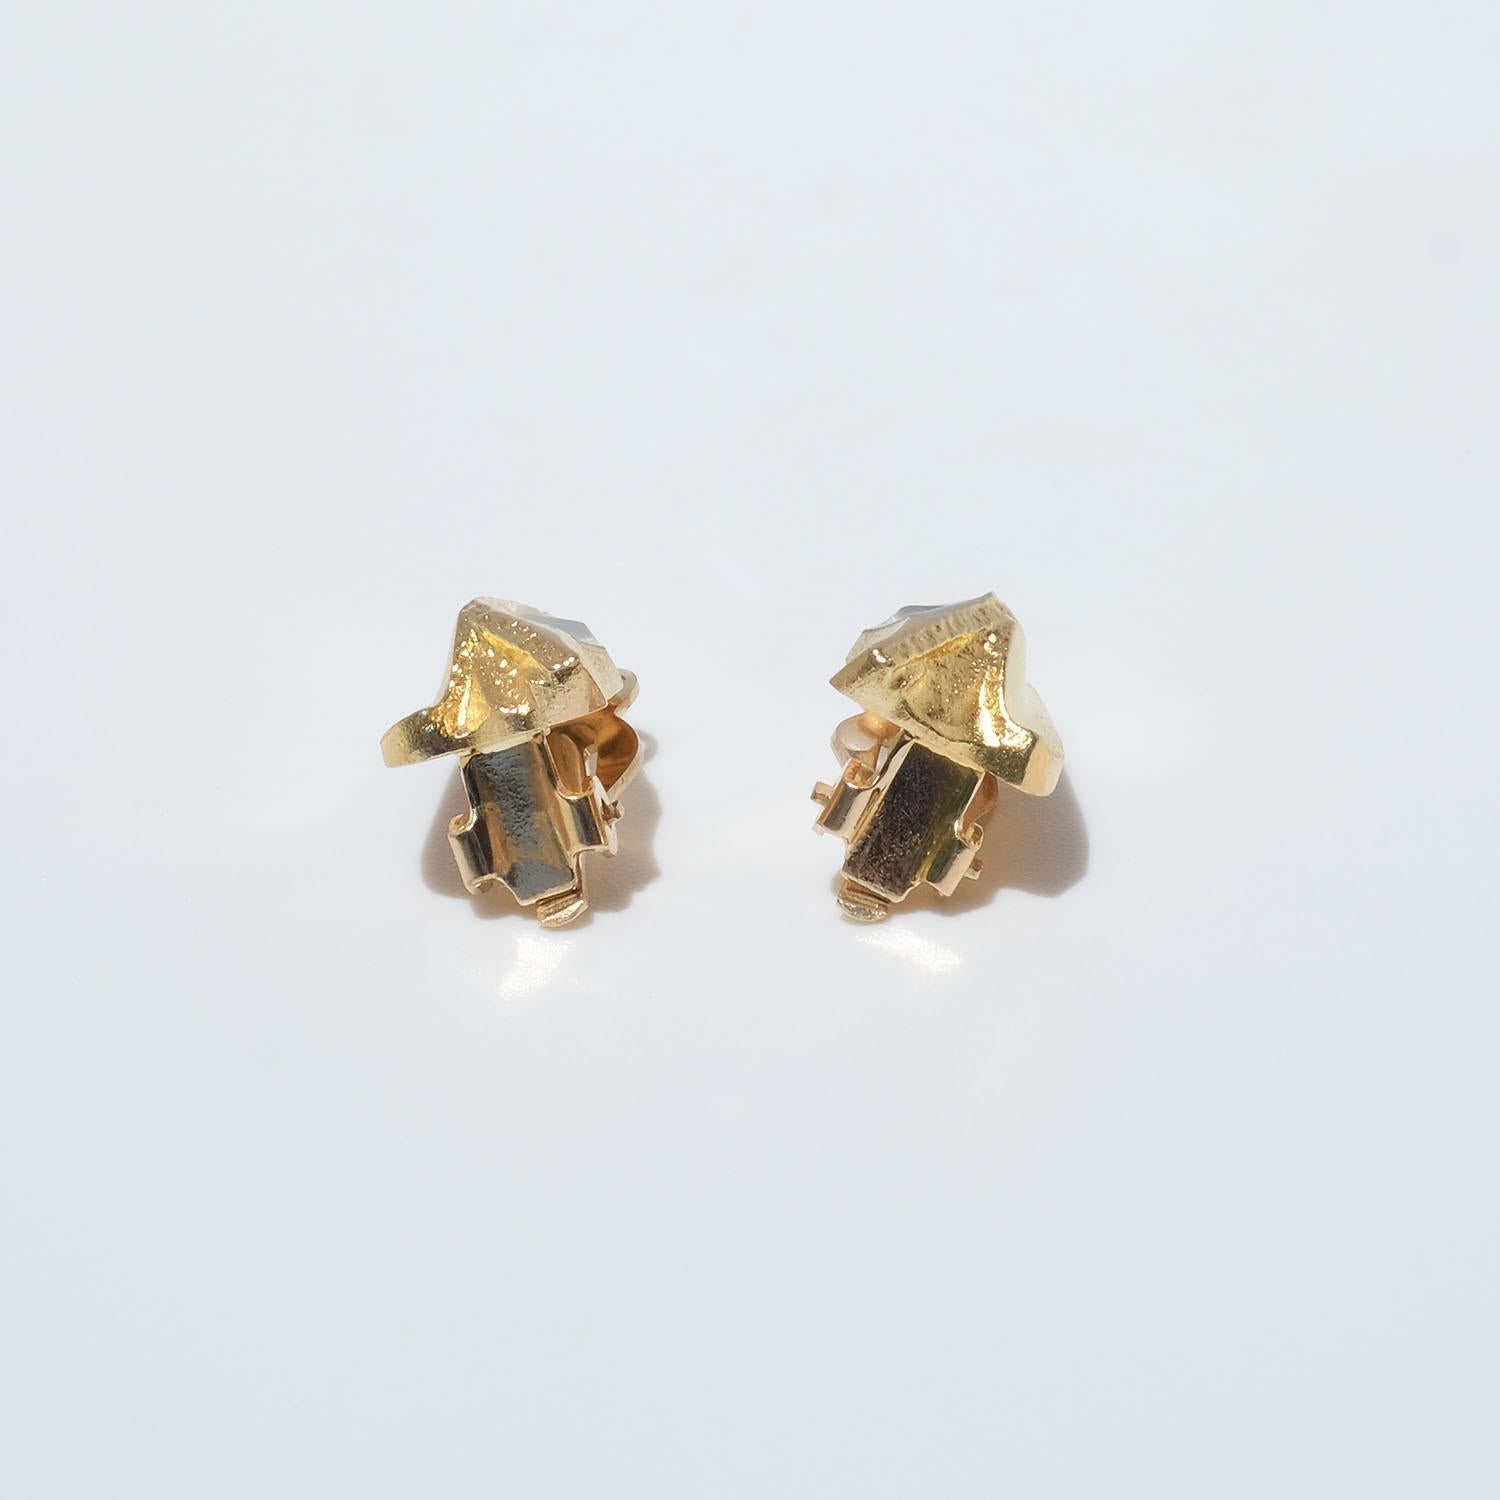 These 14 karat two-toned gold clip-on earrings are called (